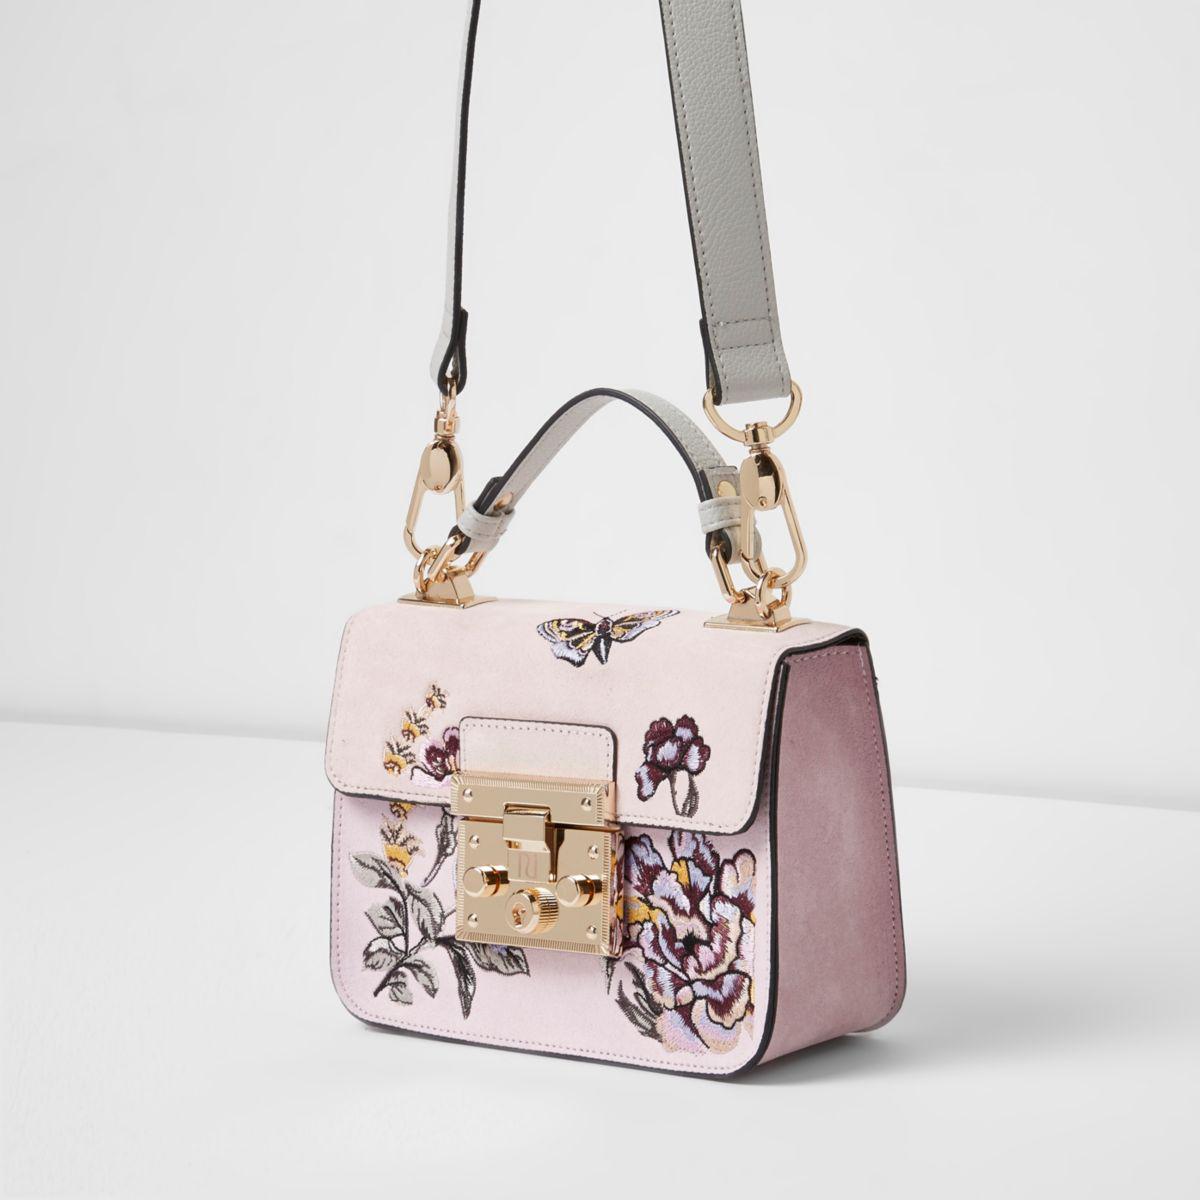 Lyst - River island Pink Embroidered Mini Lock Front Satchel Bag in Pink